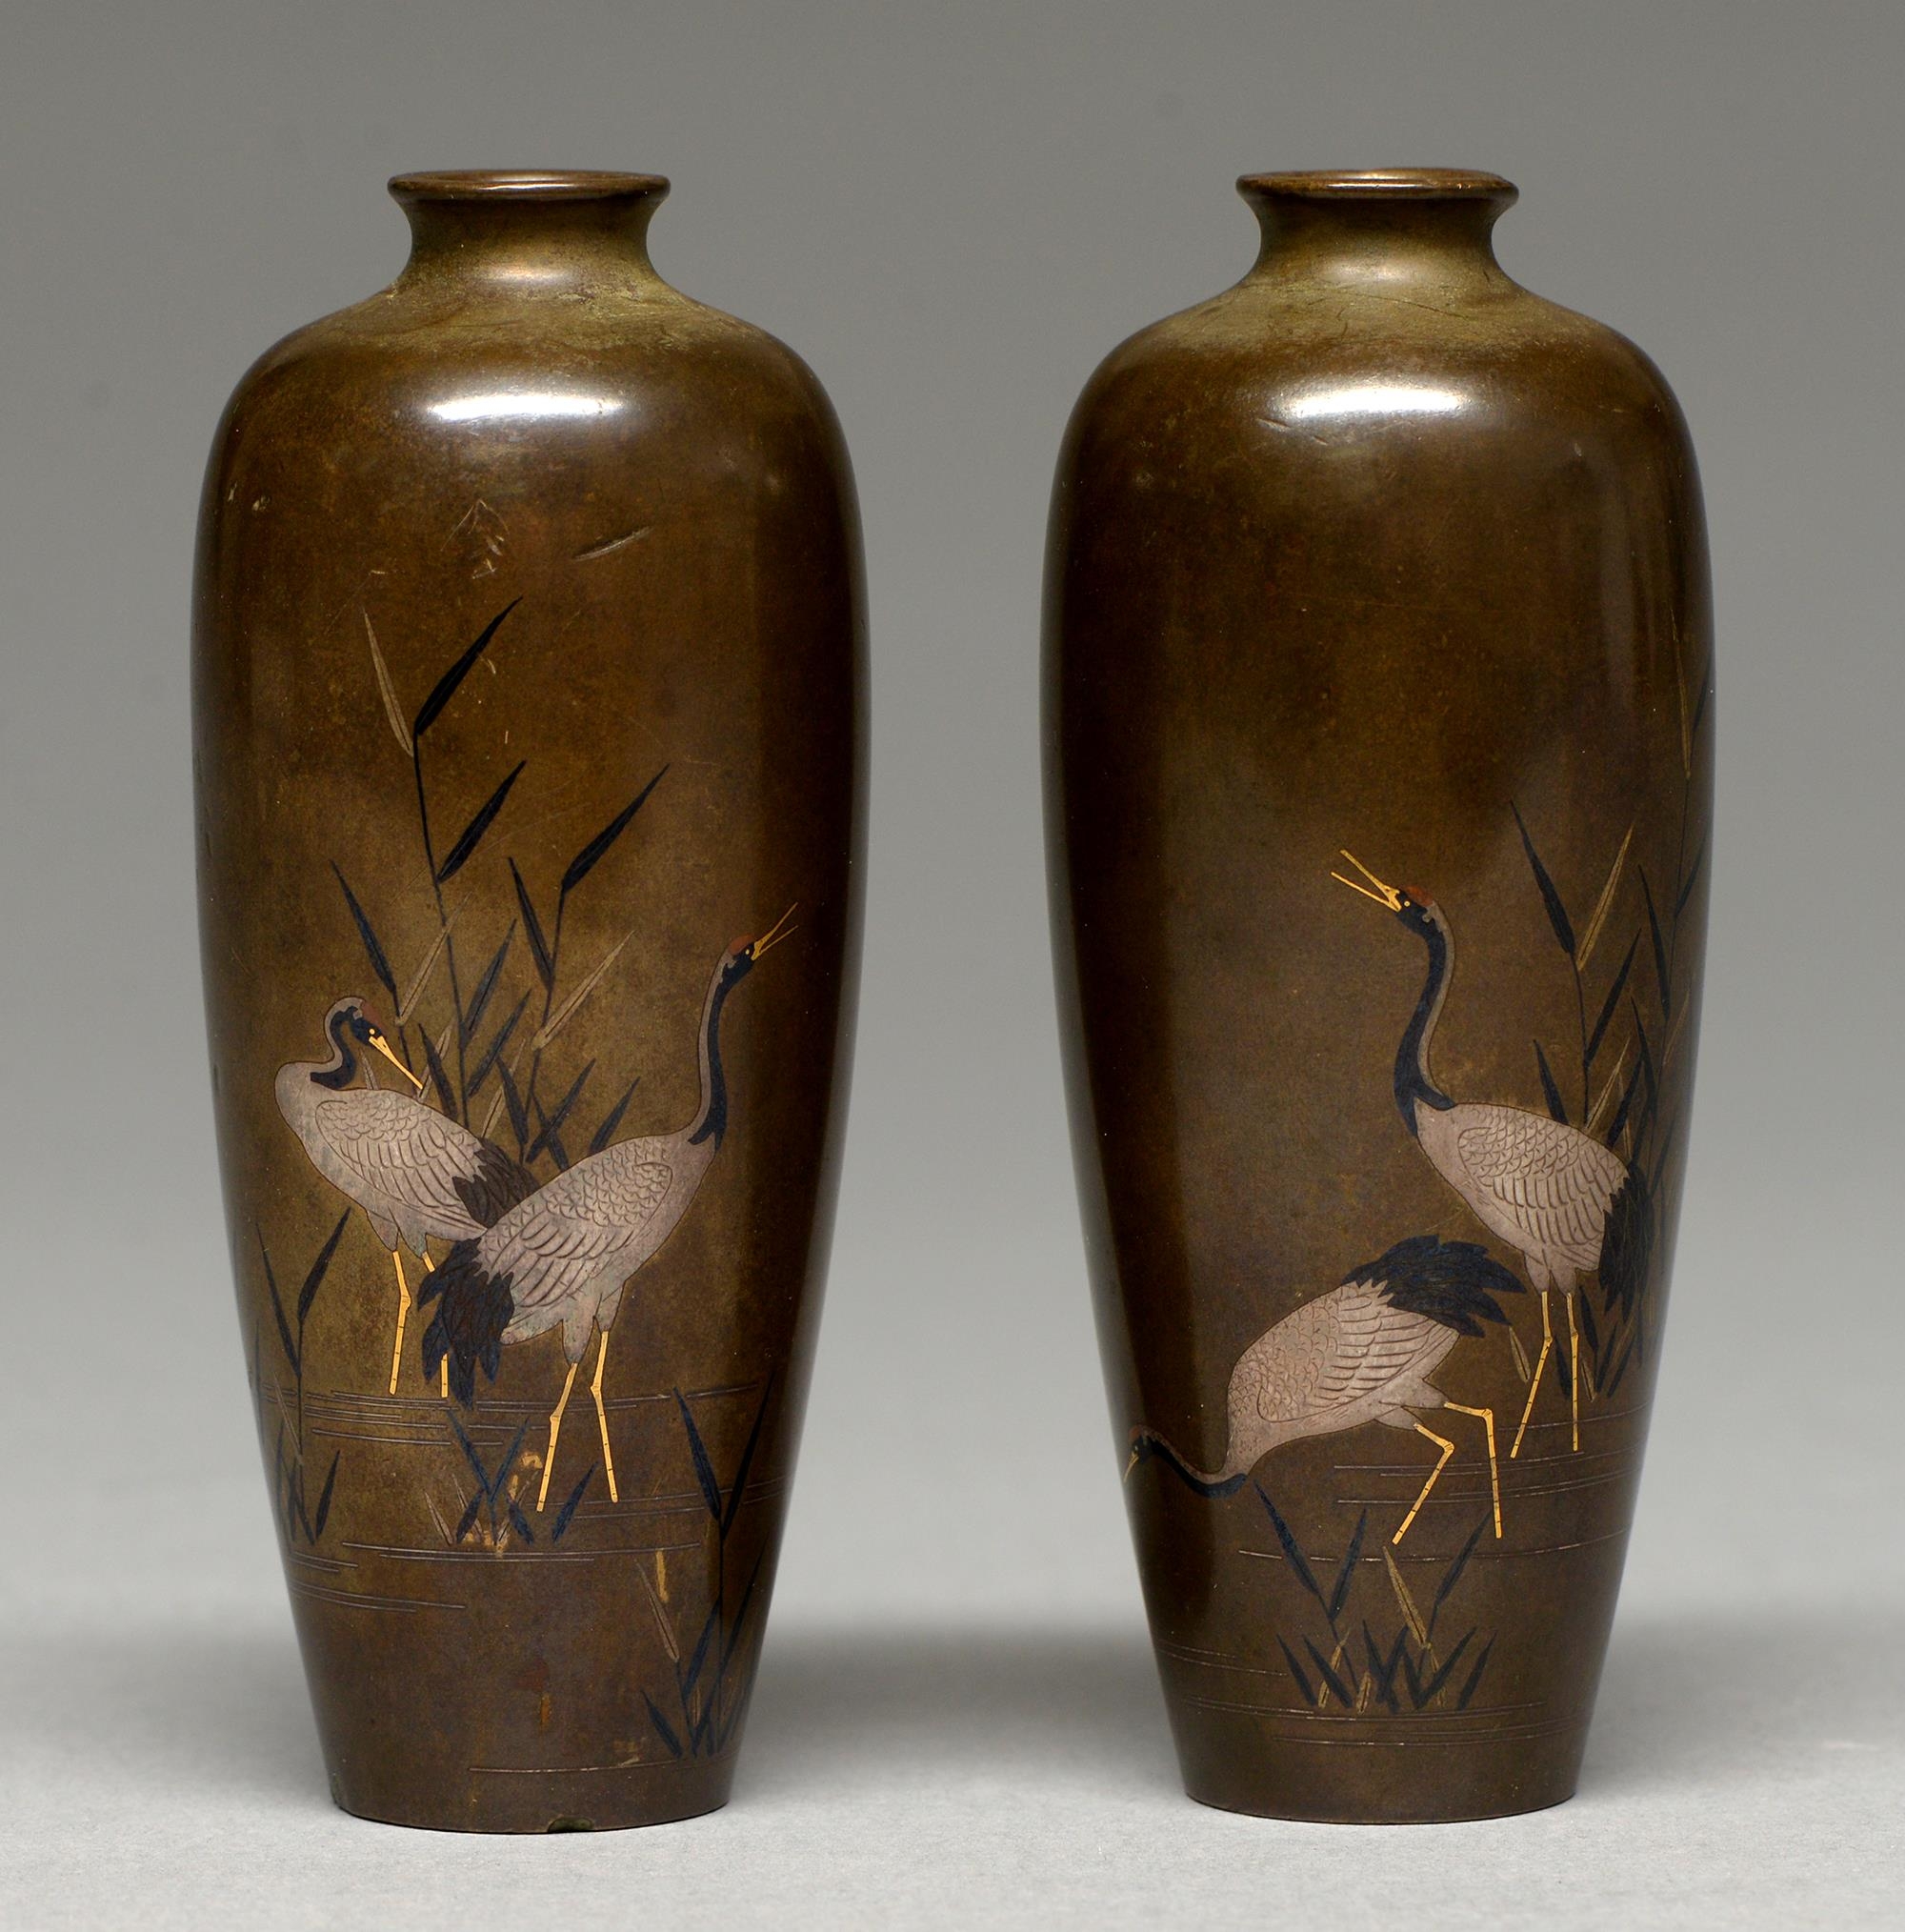 A pair of Japanese inlaid bronze vases, Meiji period, with cranes and bamboo, 11.5cm h, unsigned One